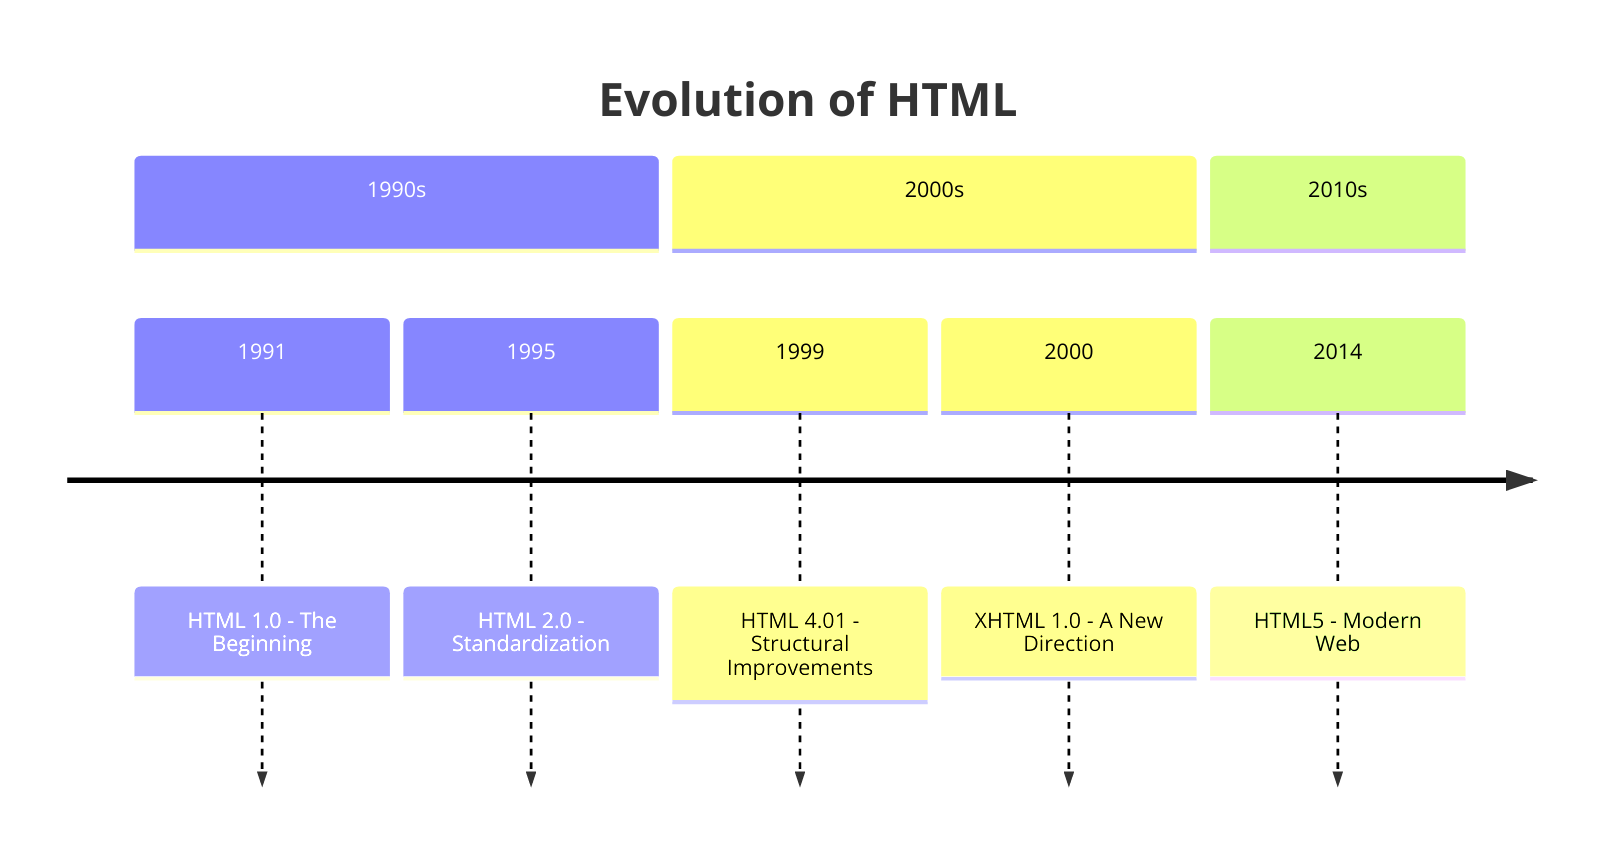 A timeline graphic showing key milestones in the history of HTML, from HTML 1.0 to HTML5.